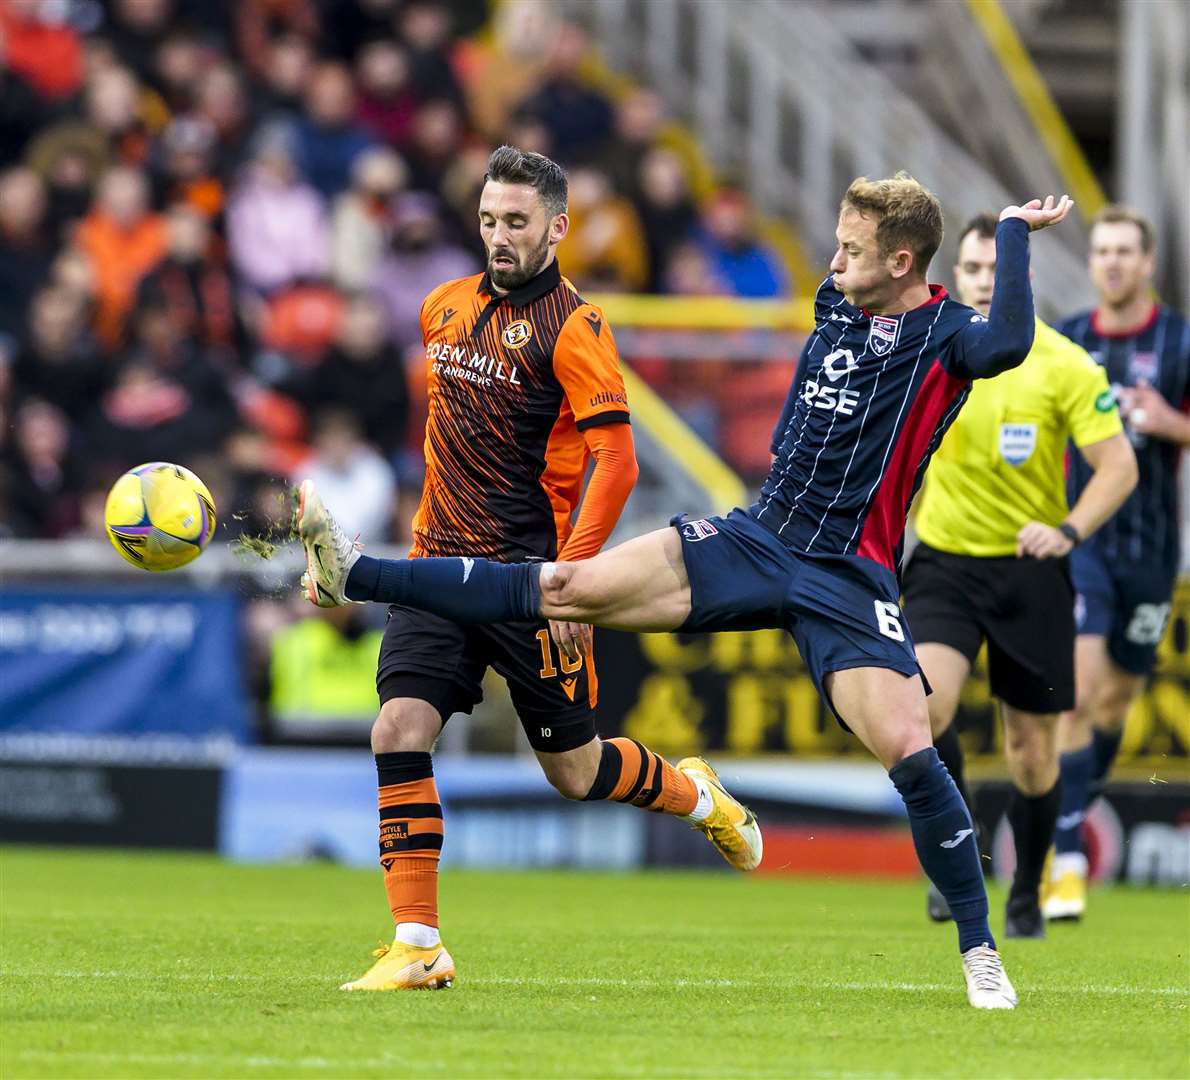 Nicky Clark was at the double to take all three points for Dundee United against Ross County. Picture: Kenny Ramsay